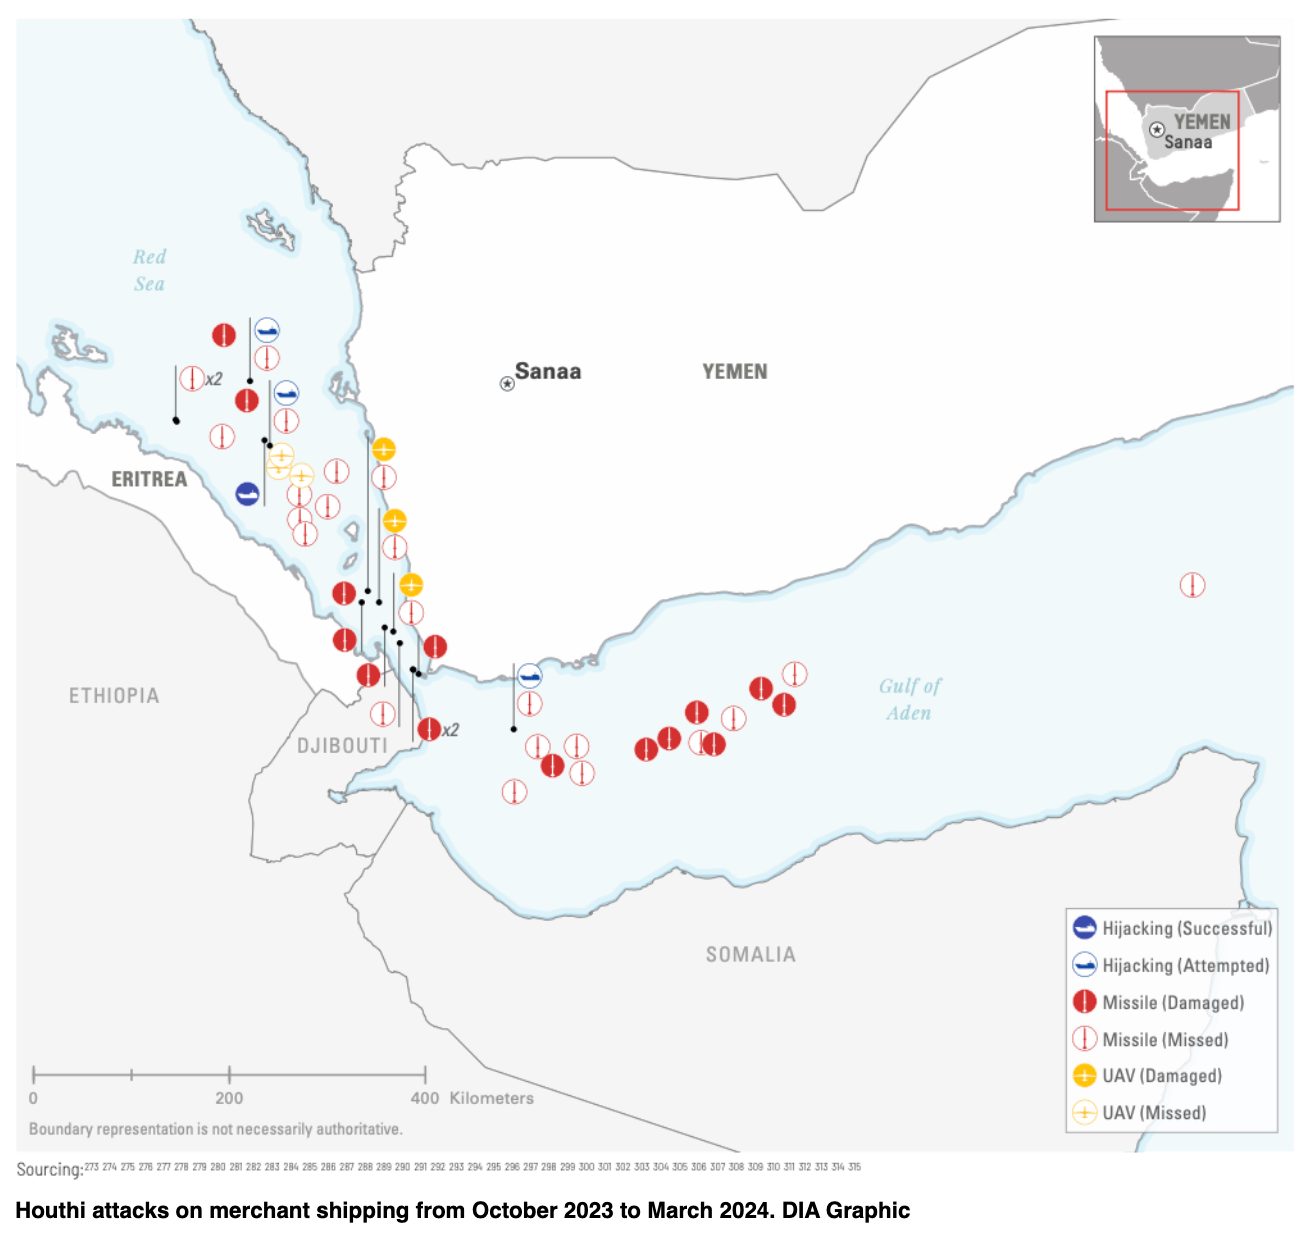 U.S. Naval Institute graphic on Houthi attacks on merchant shipping